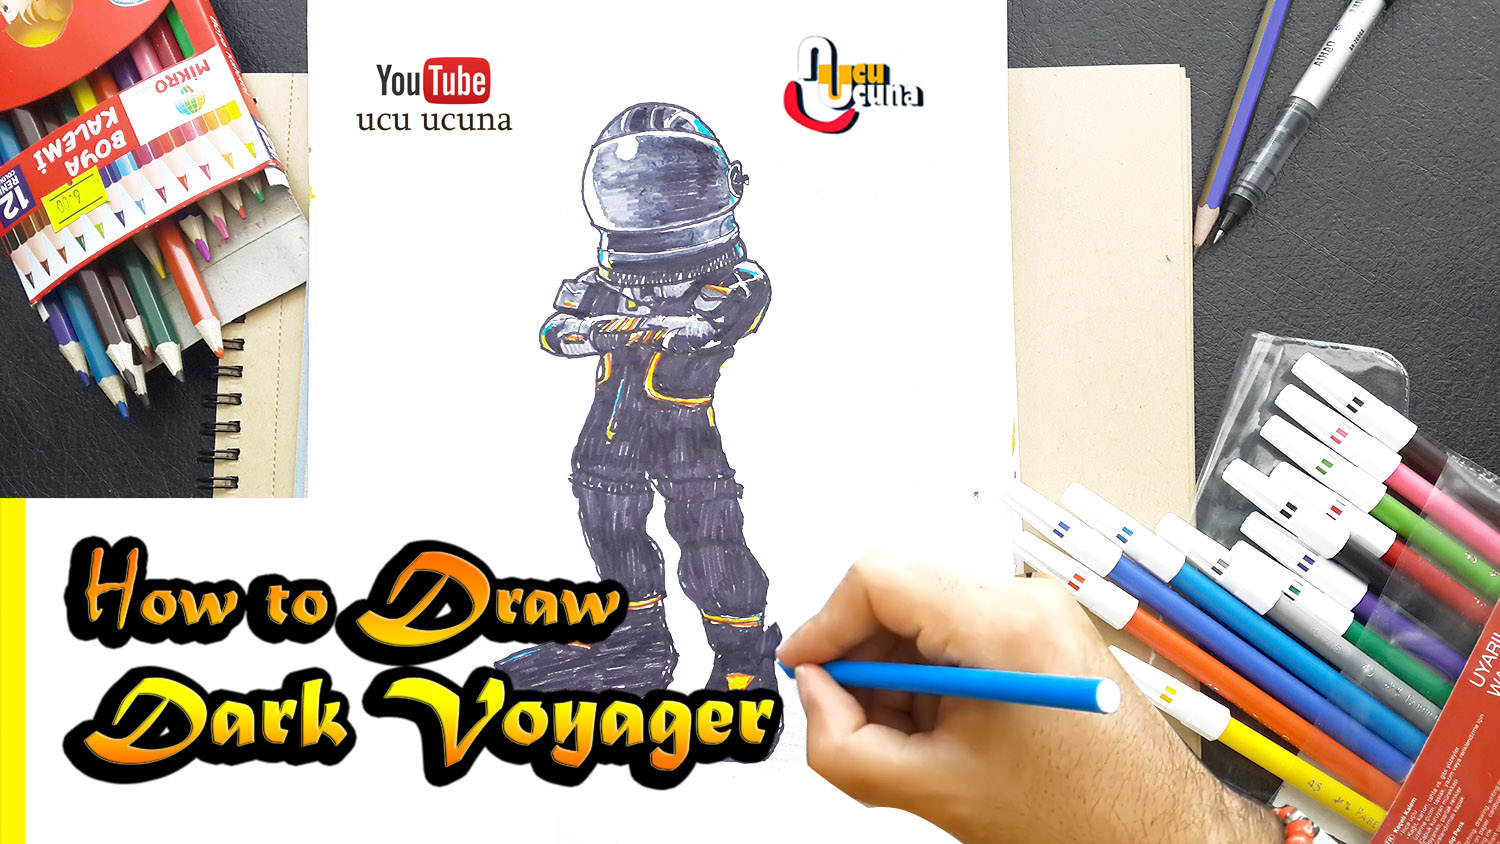 How to draw dark voyager tutorial youtube channel name is ucu ucuna learn how to draw dark voyager from fortnite step by step beginner drawing tutorial of the voyager skin from fortnite